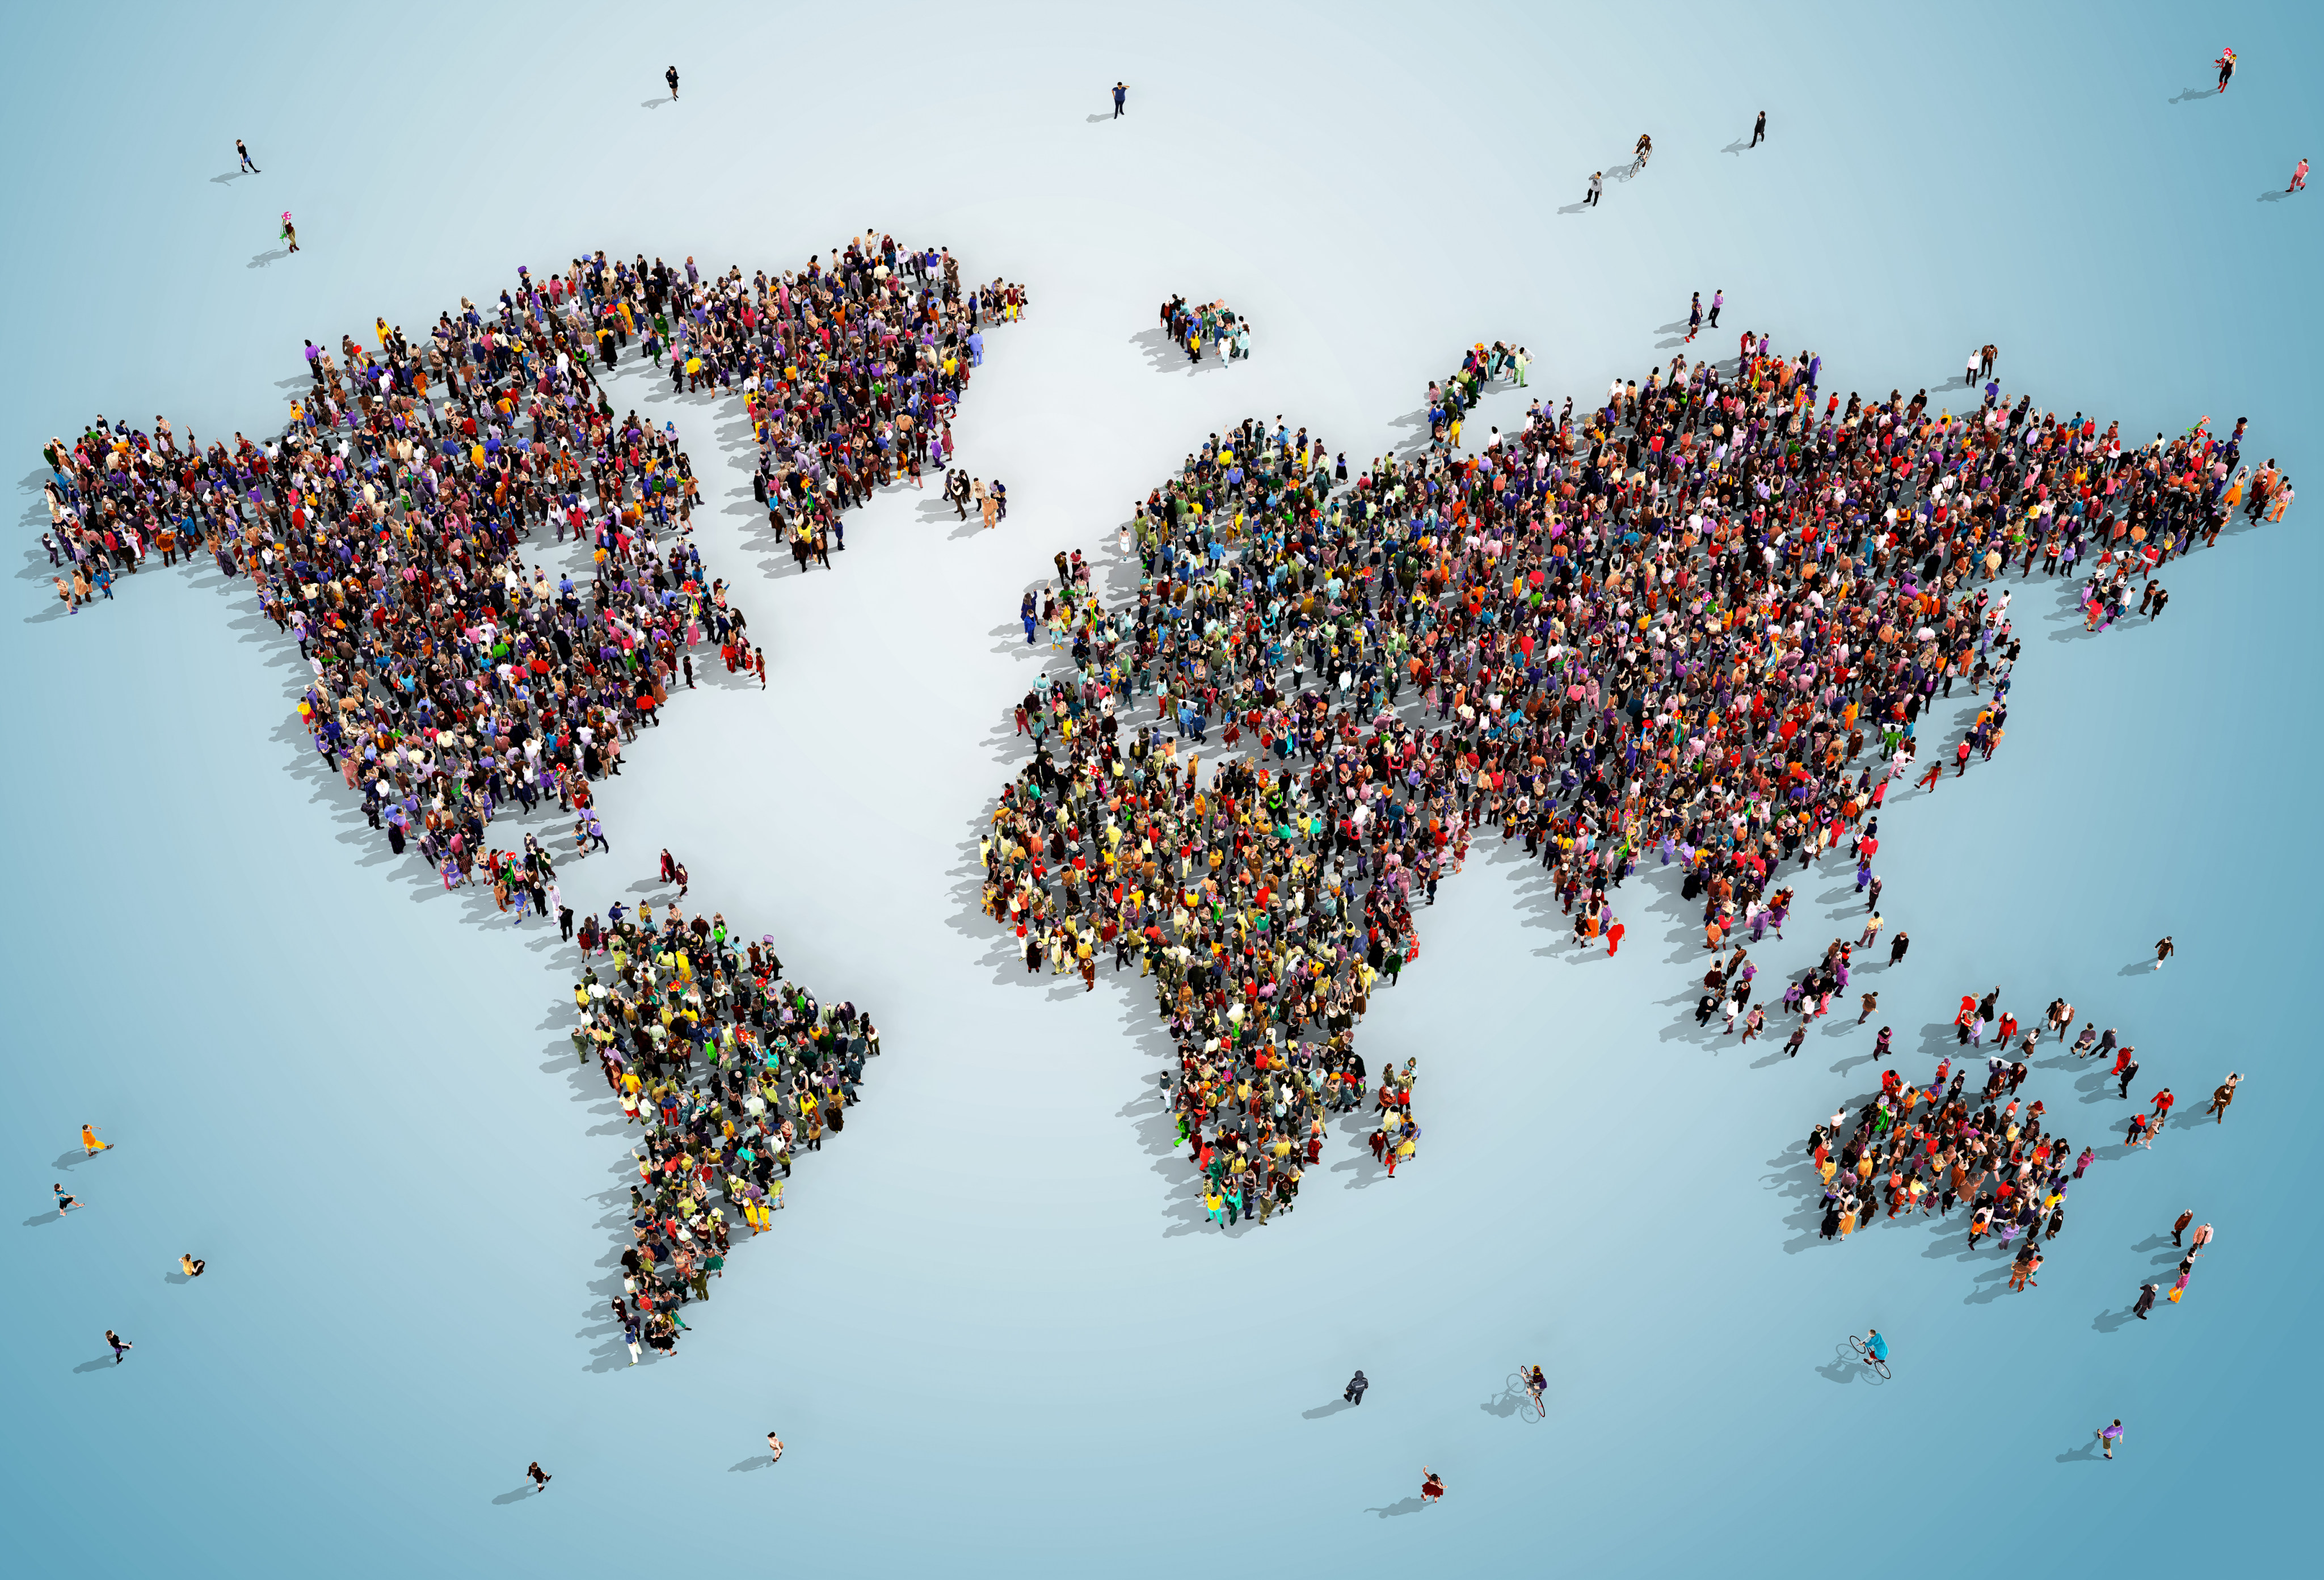 Despite globalisation, an interest in international affairs is not the priority for most people. Photo: Shutterstock